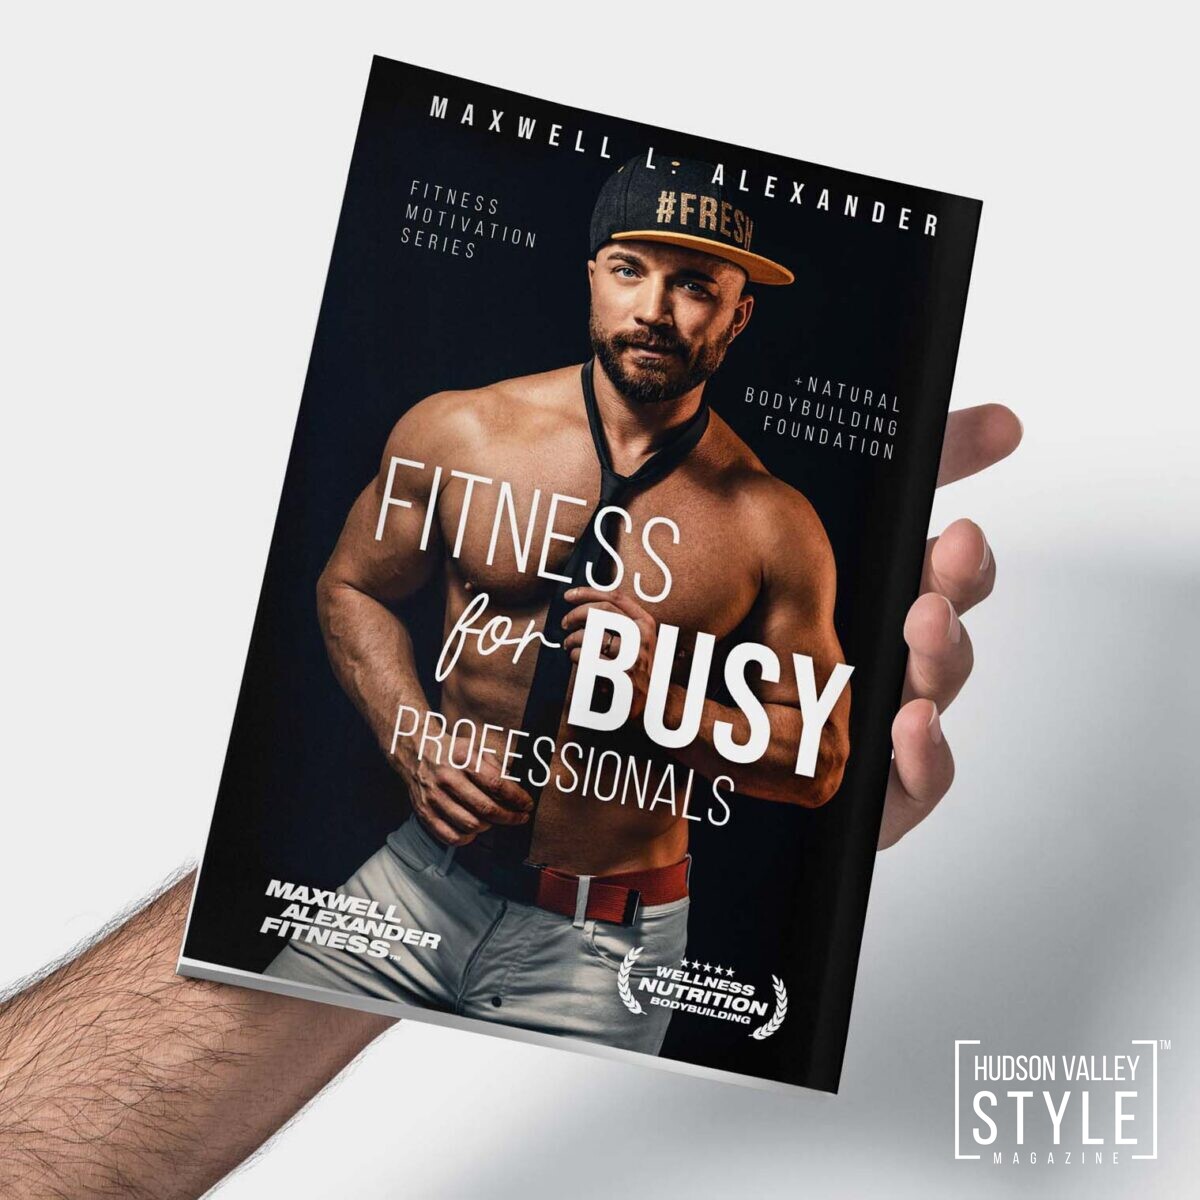 Are You Already Failing Your New Year's Fitness Resolutions? The New Book on Fitness for Busy Professionals Might Save You by Maxwell Alexander, MA, BFA, BS, ISSA Certified Fitness Trainer, ISSA Certified Bodybuilding Specialist